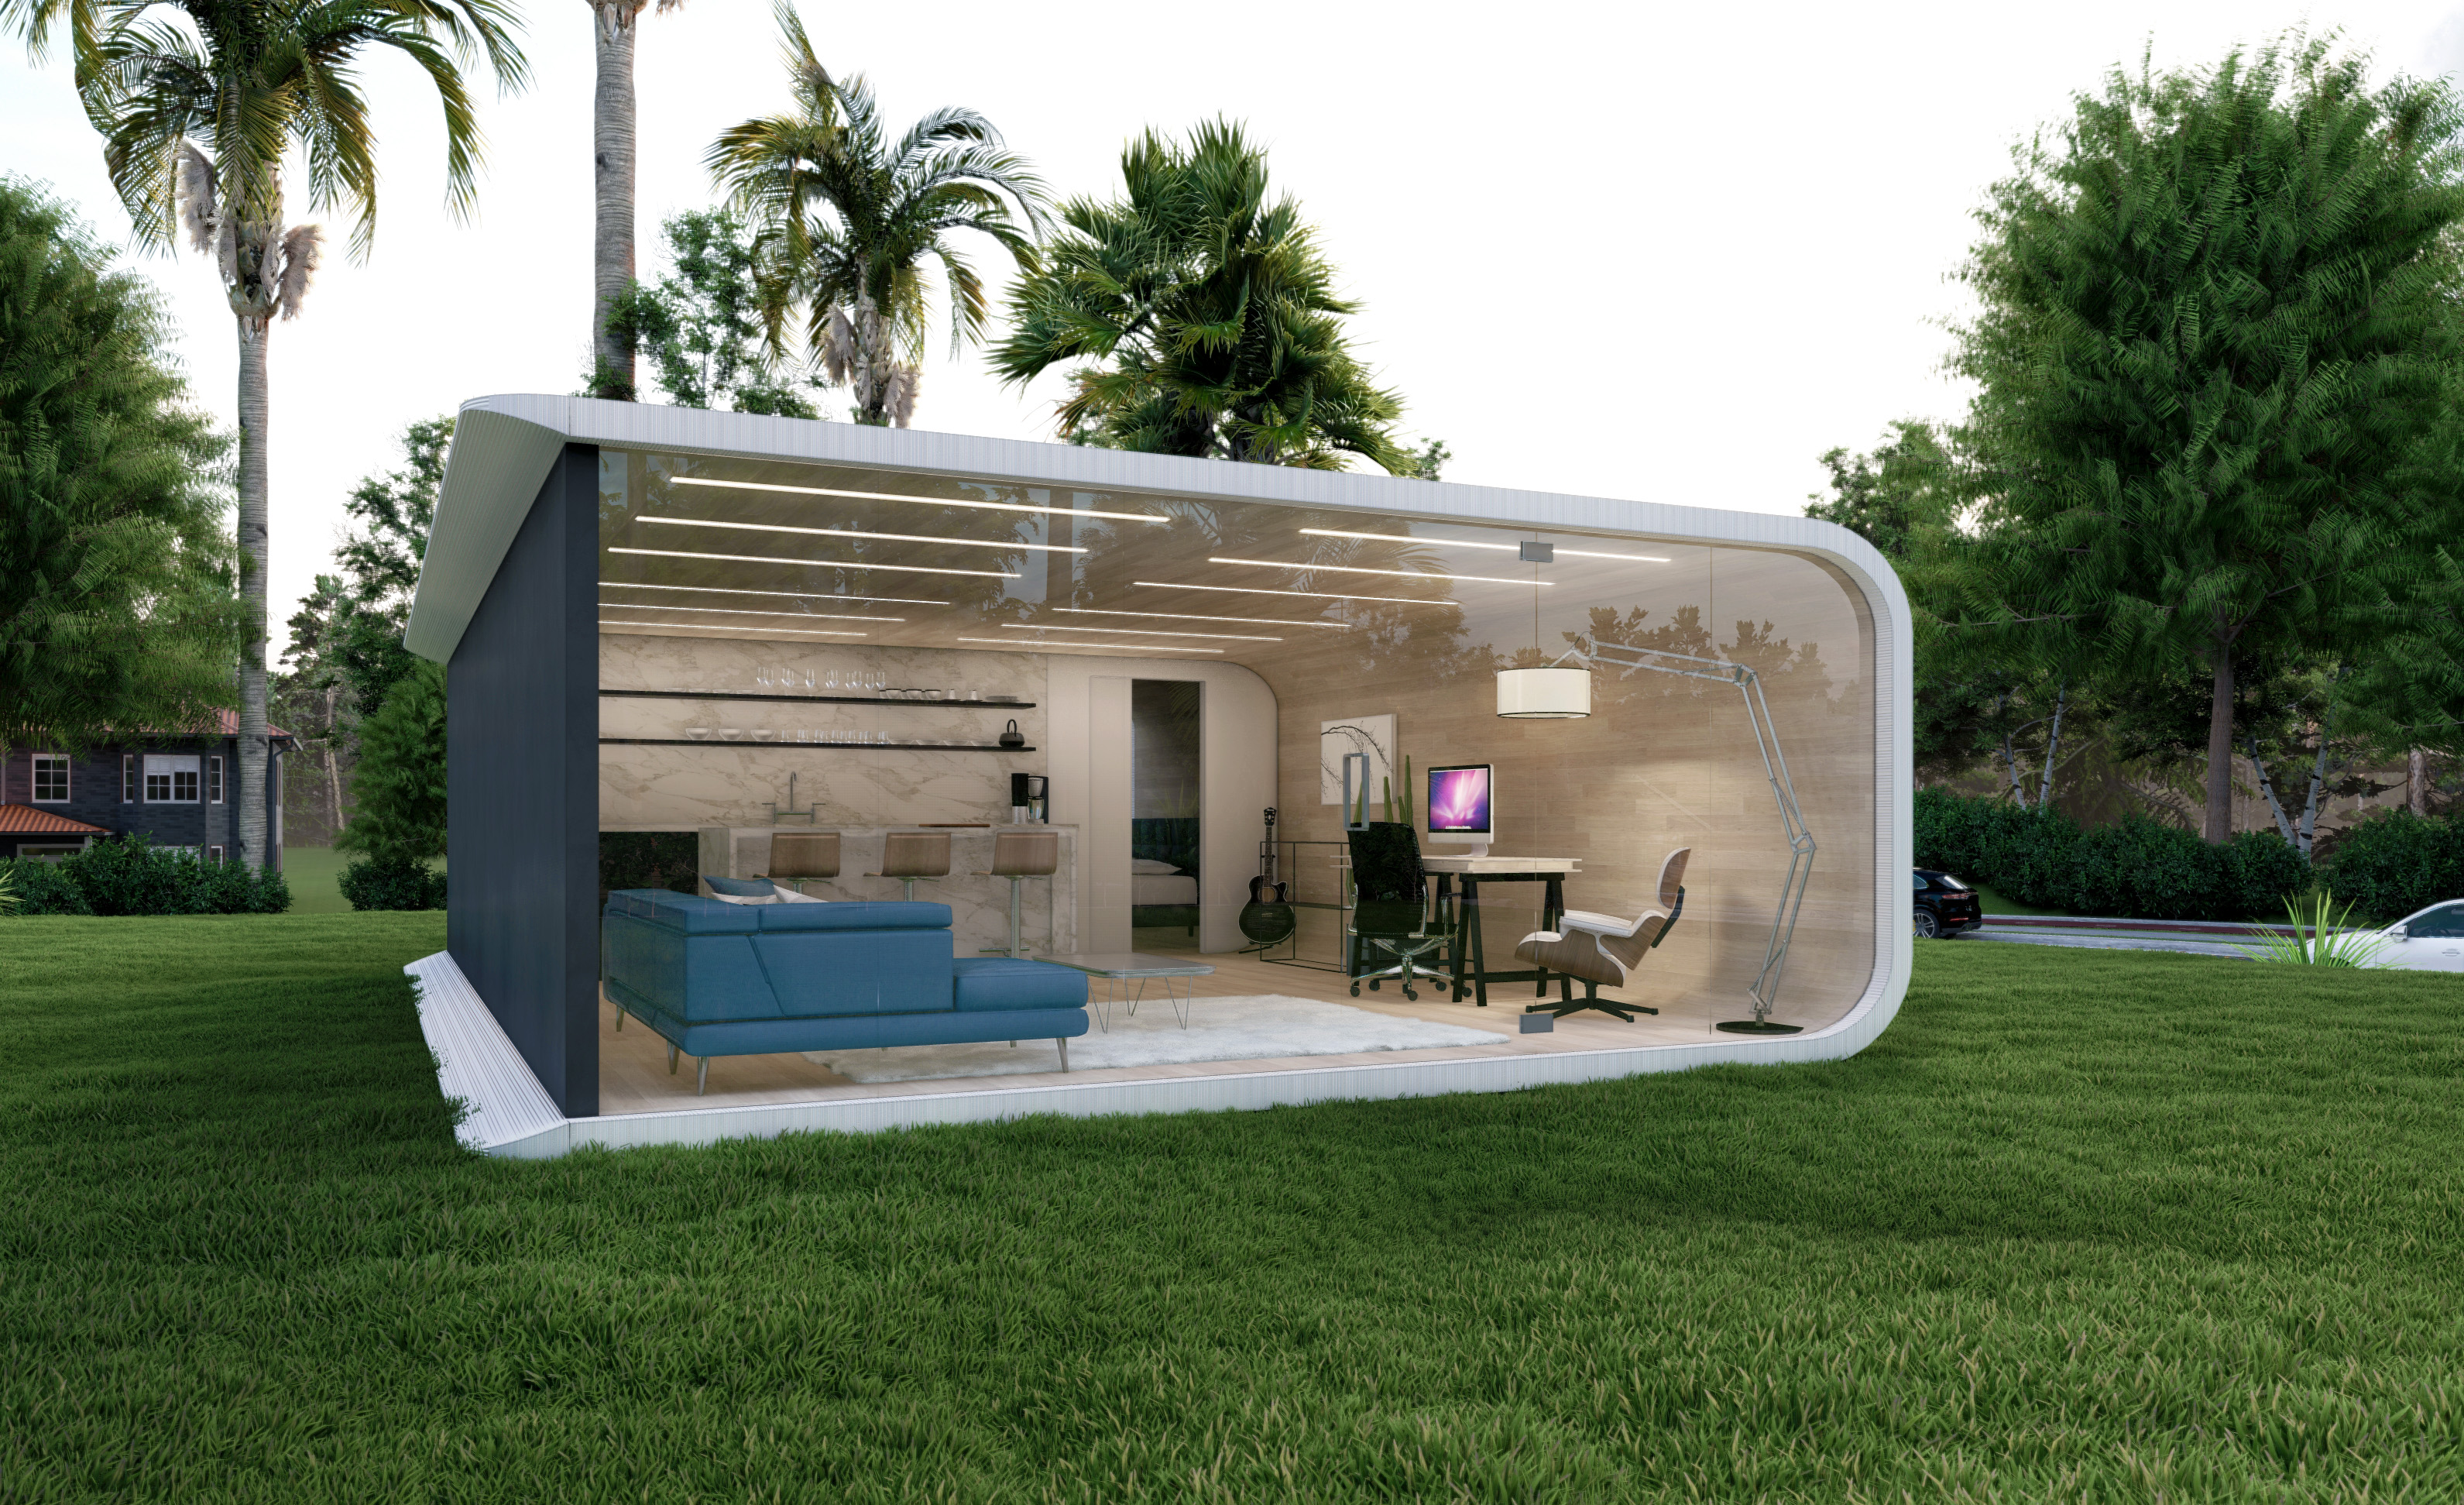 Rendering of outdoor living space inside 3d printed accessory dwelling unit